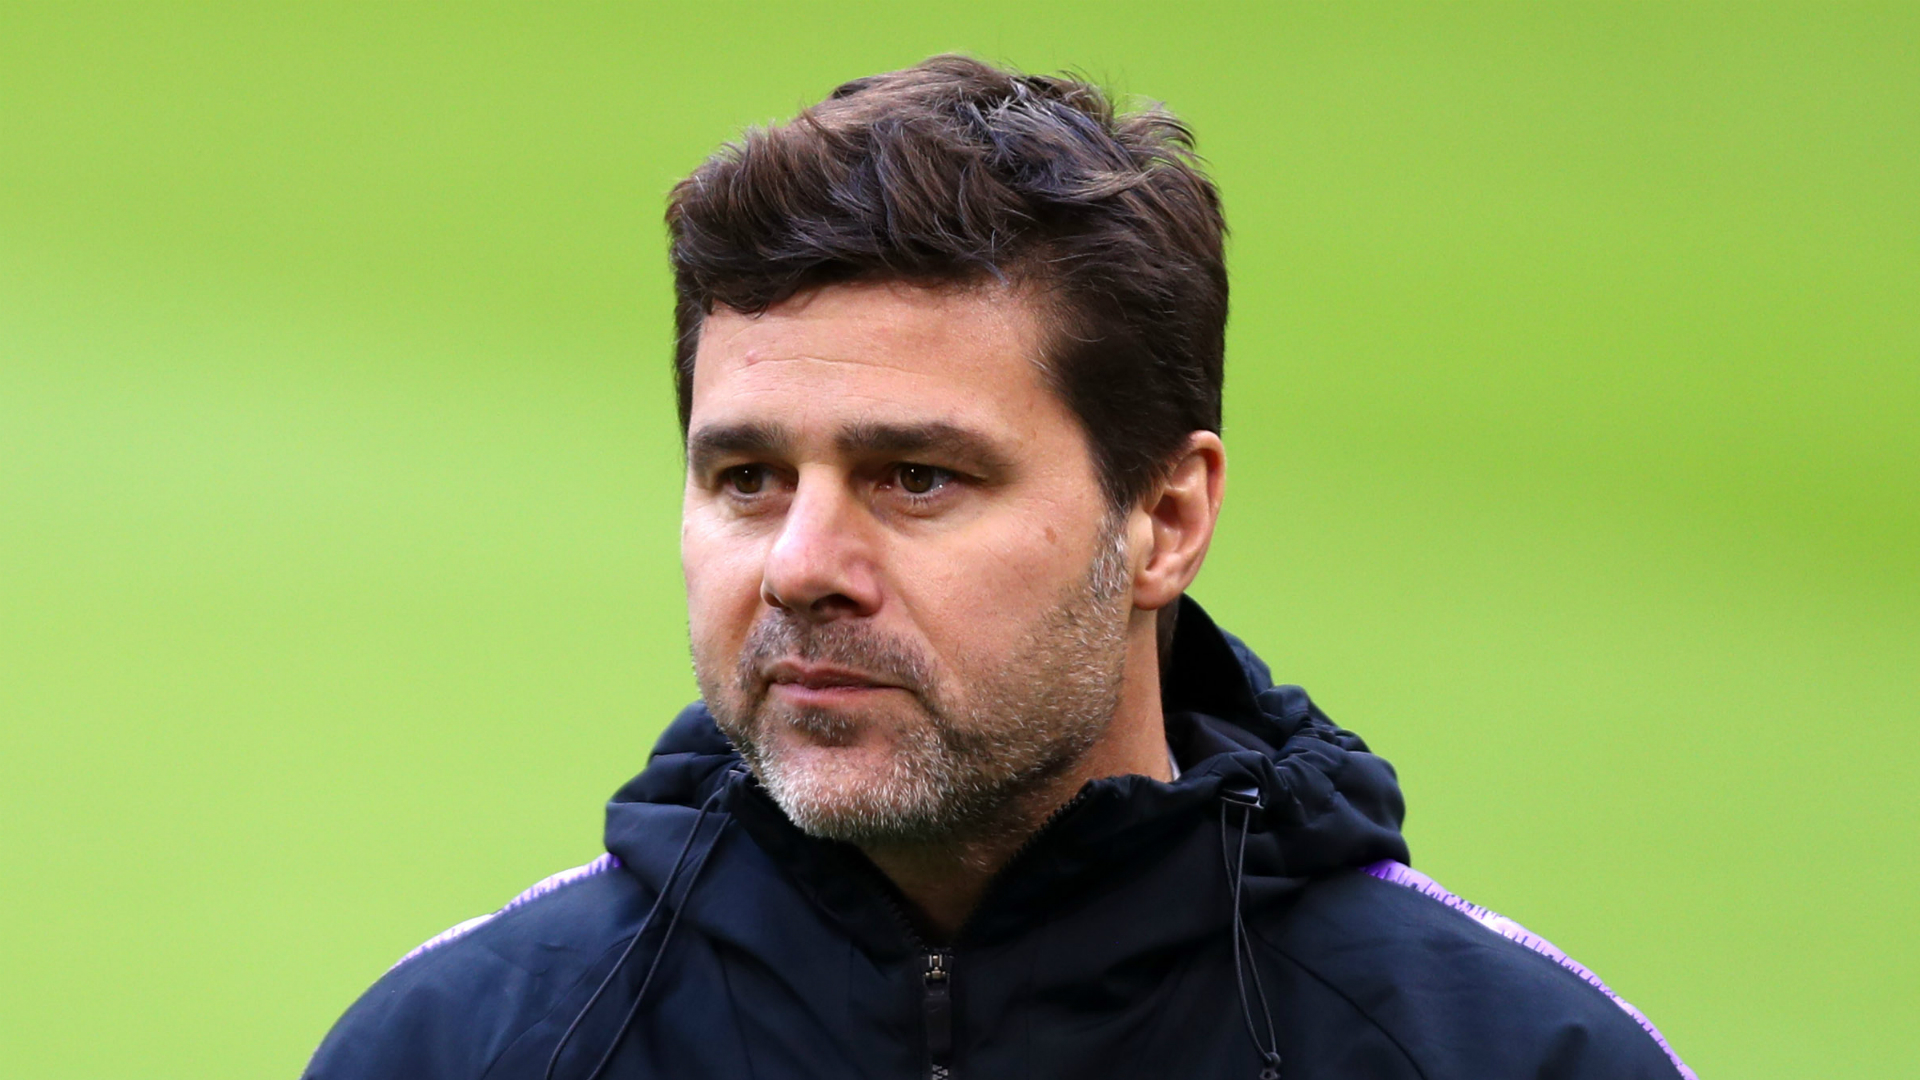 Tottenham might well have been searching for a new manager had the outcome of the Champions League final been reversed.